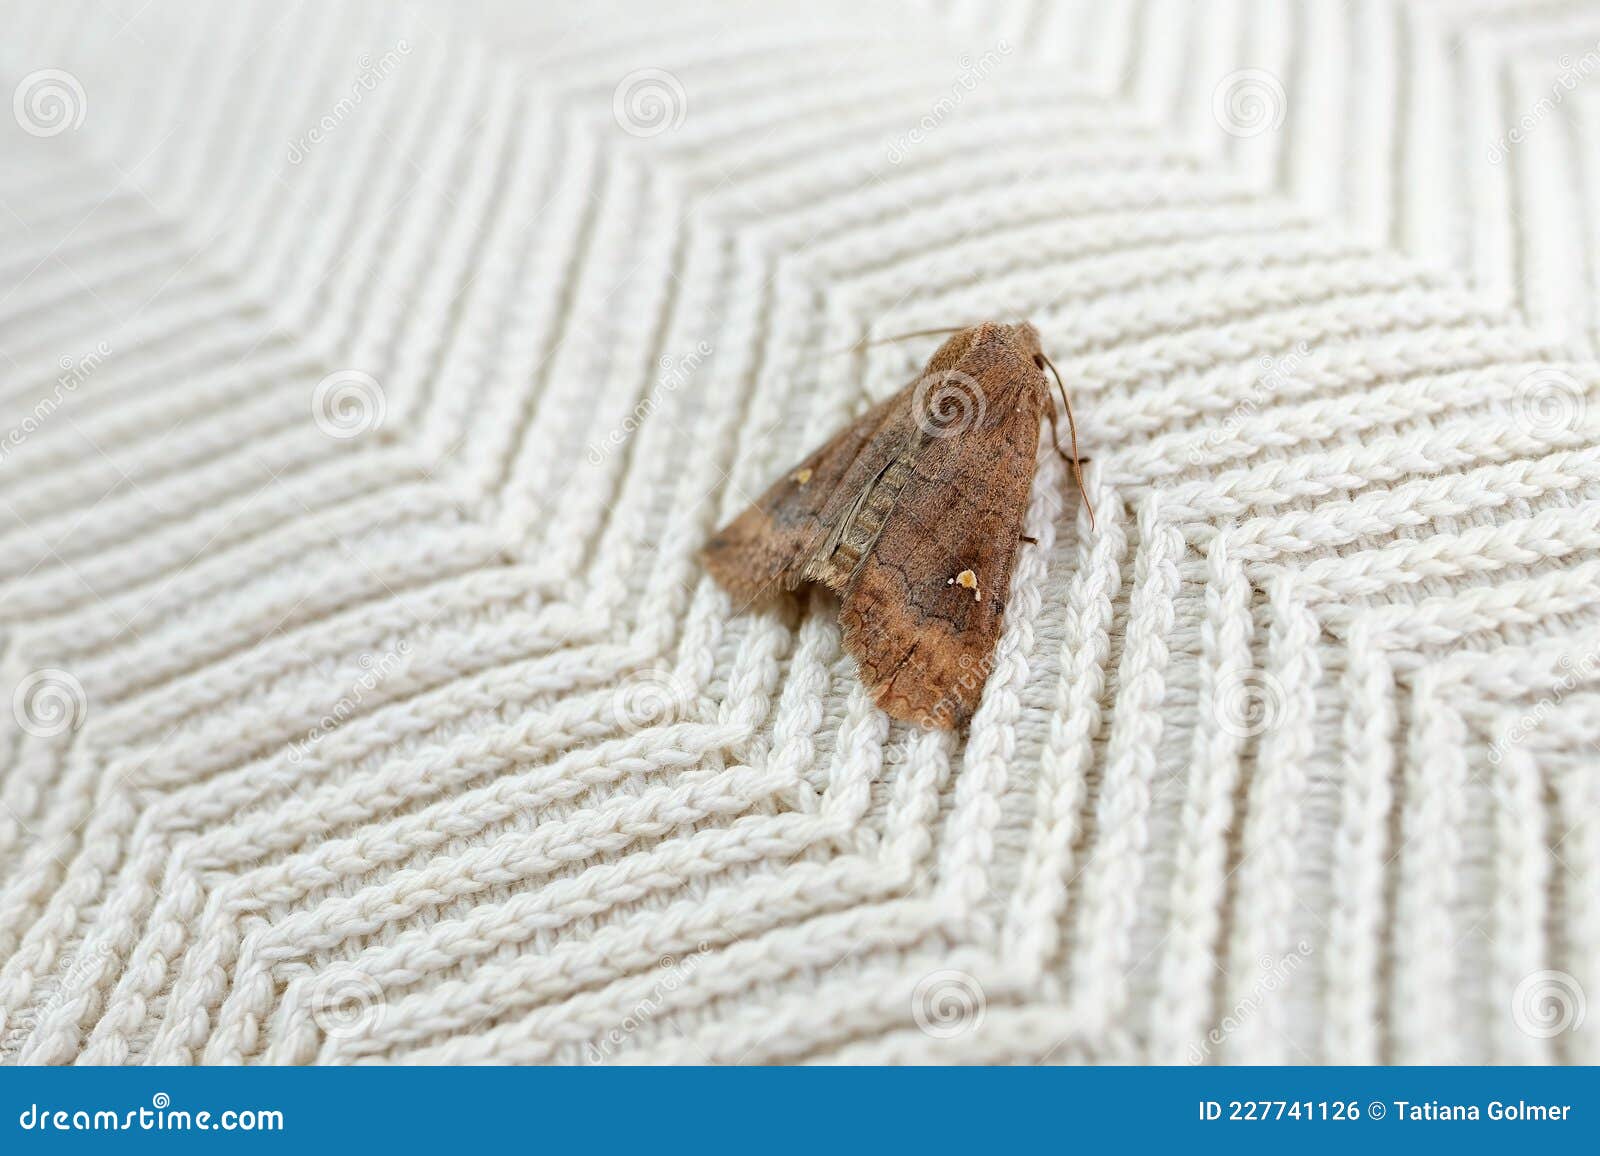 https://thumbs.dreamstime.com/z/brown-insect-clothes-moth-sitting-white-woolen-sweater-selective-focus-pest-concept-destruction-damage-to-house-227741126.jpg